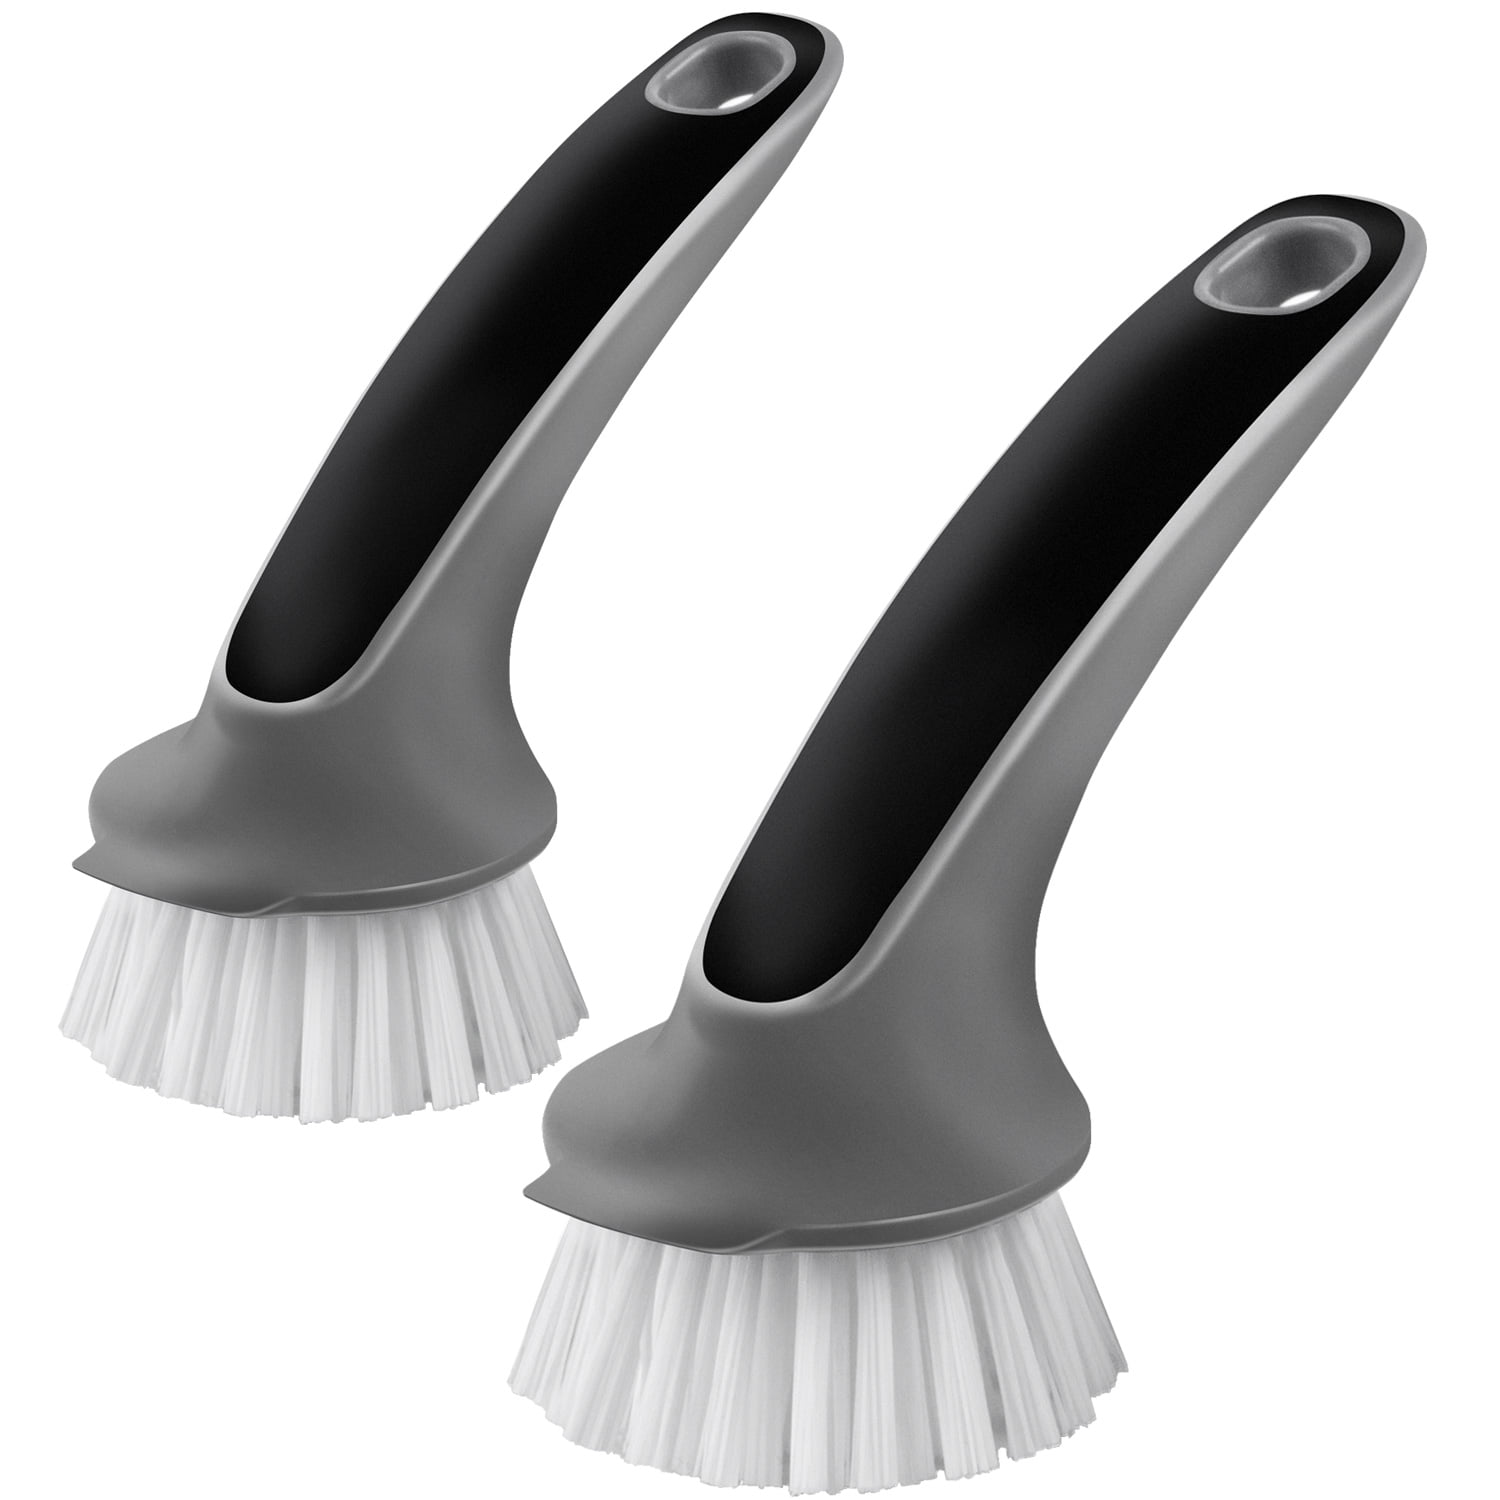 MOSOLAN Dish Brush, 3 Pack, Black, White, Non-Slip Handle, Rubber, Ideal  for Scrubbing Dishes, Pots, Pans, Cast Iron Skillet, Sinks, Bathroom,  Kitchen